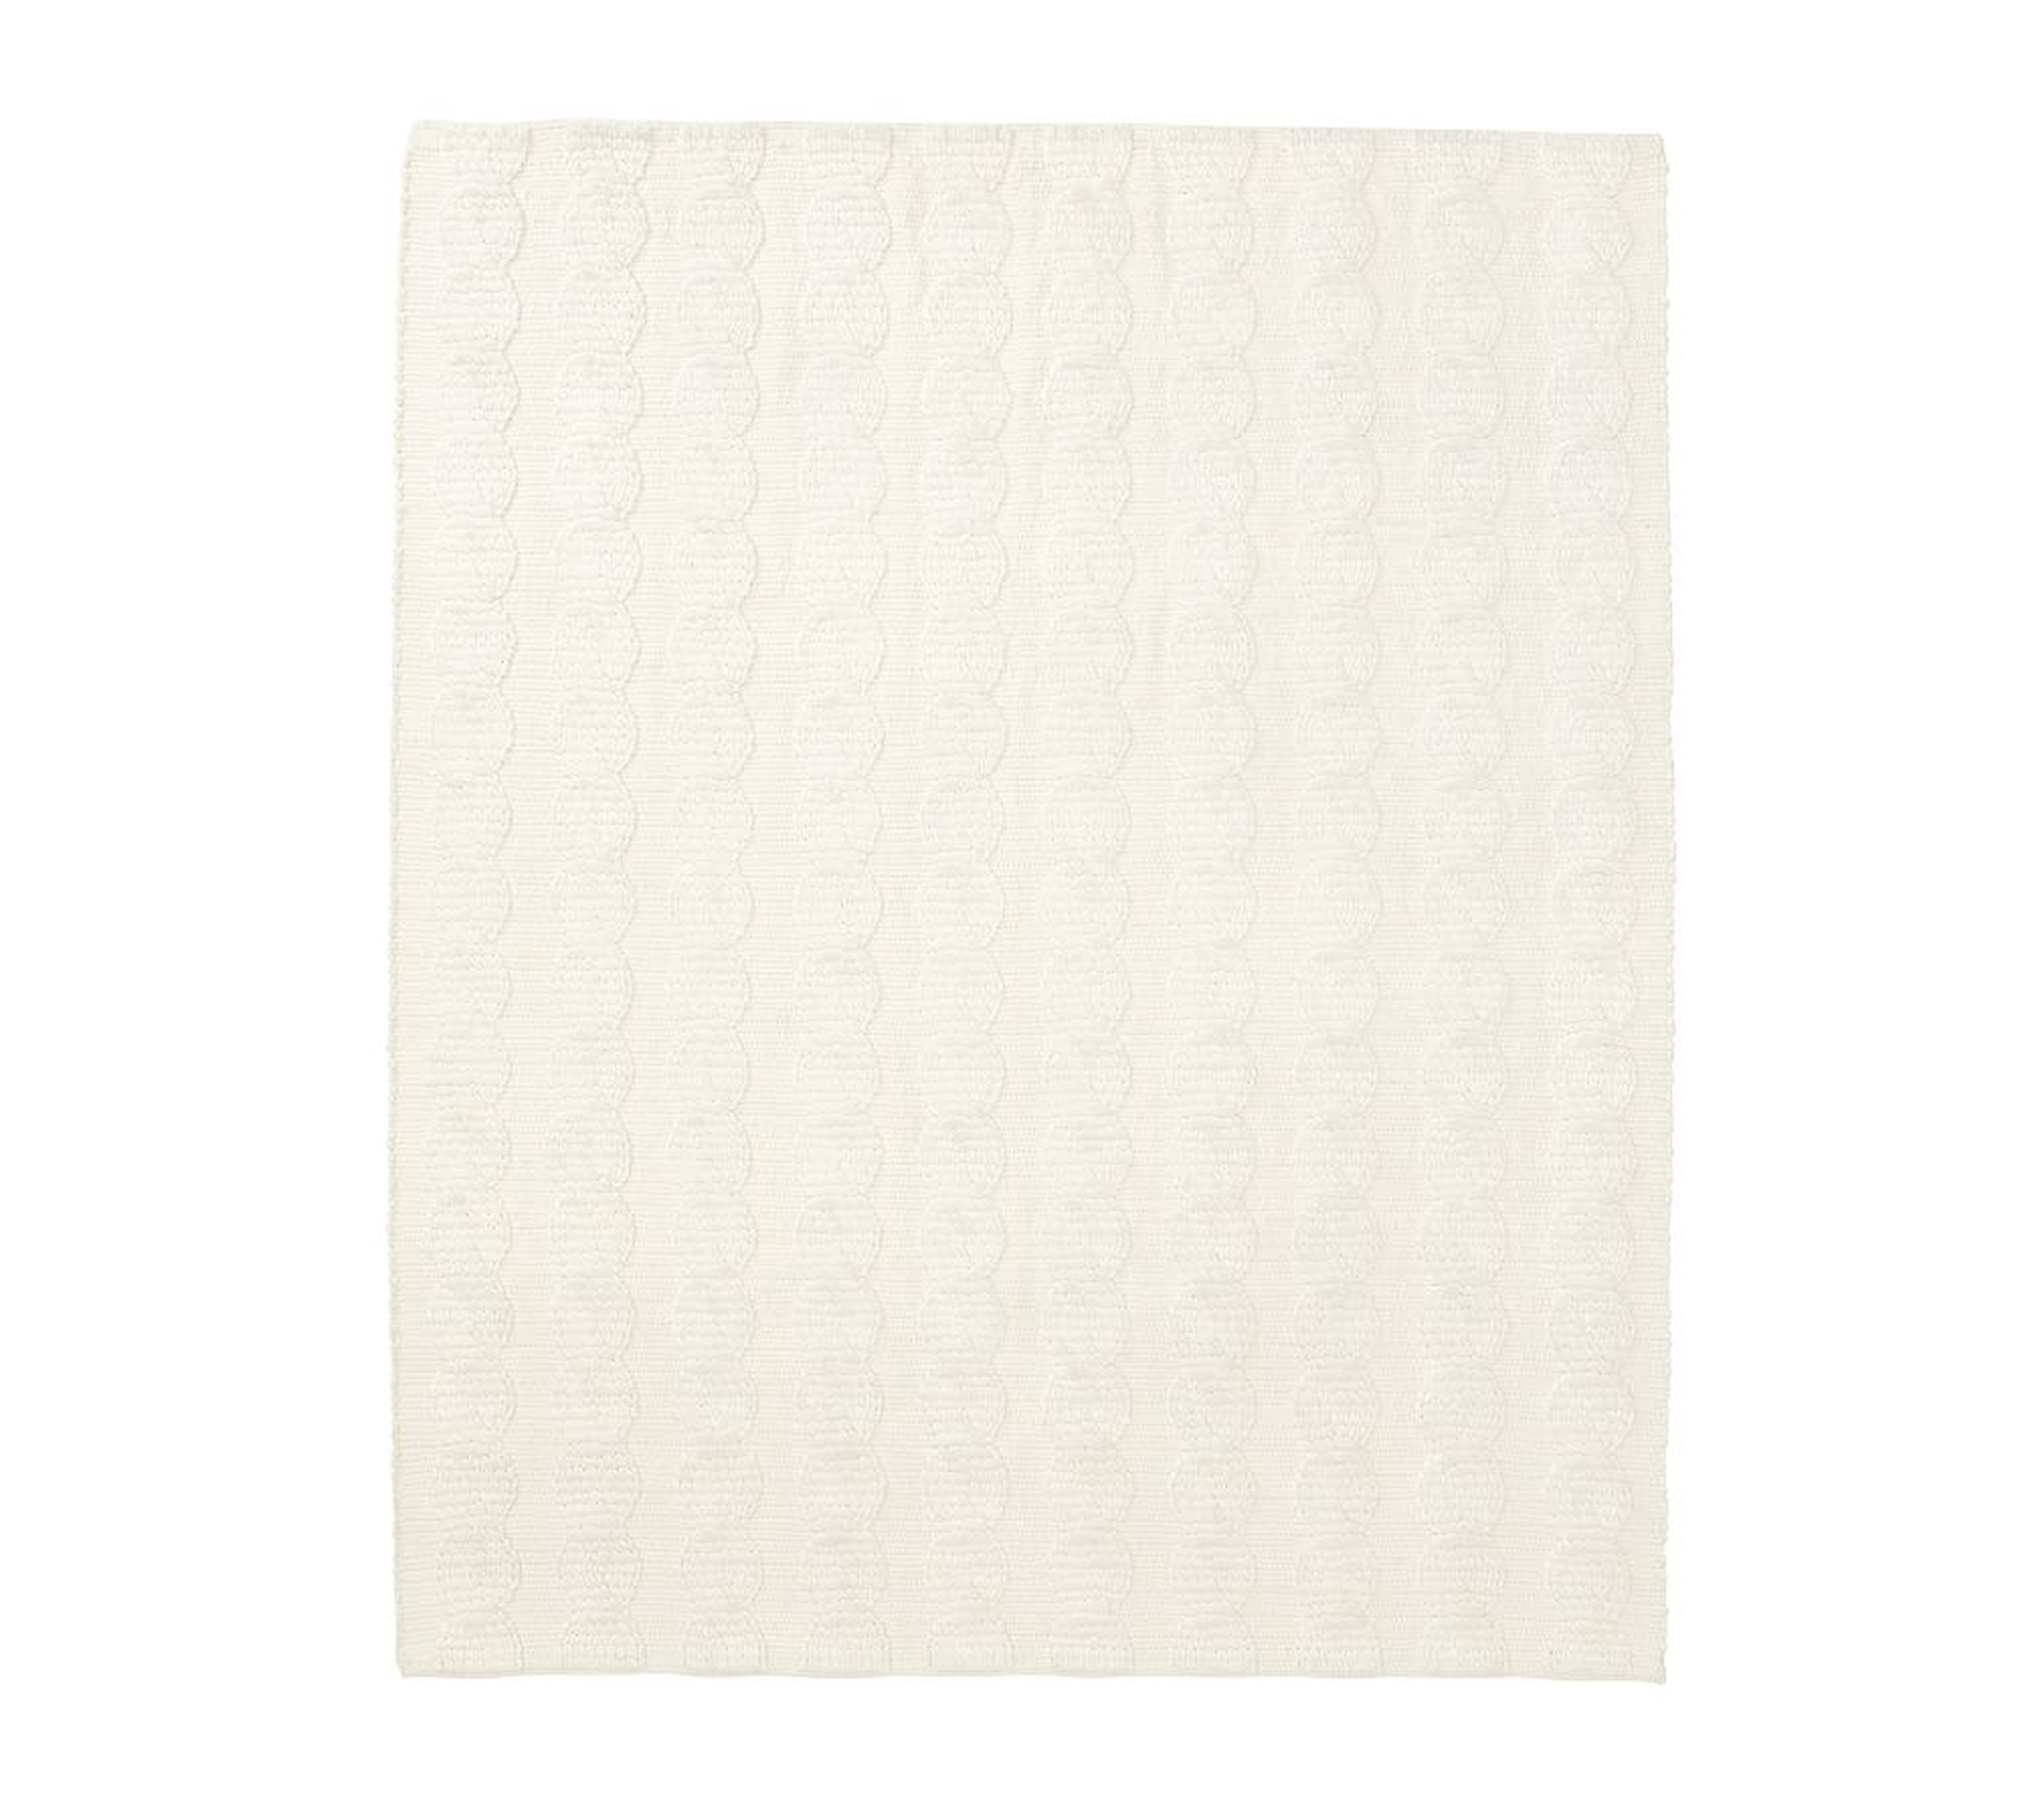 Colossal Knit Sweater Rug, 9 x 12', Ivory - Pottery Barn